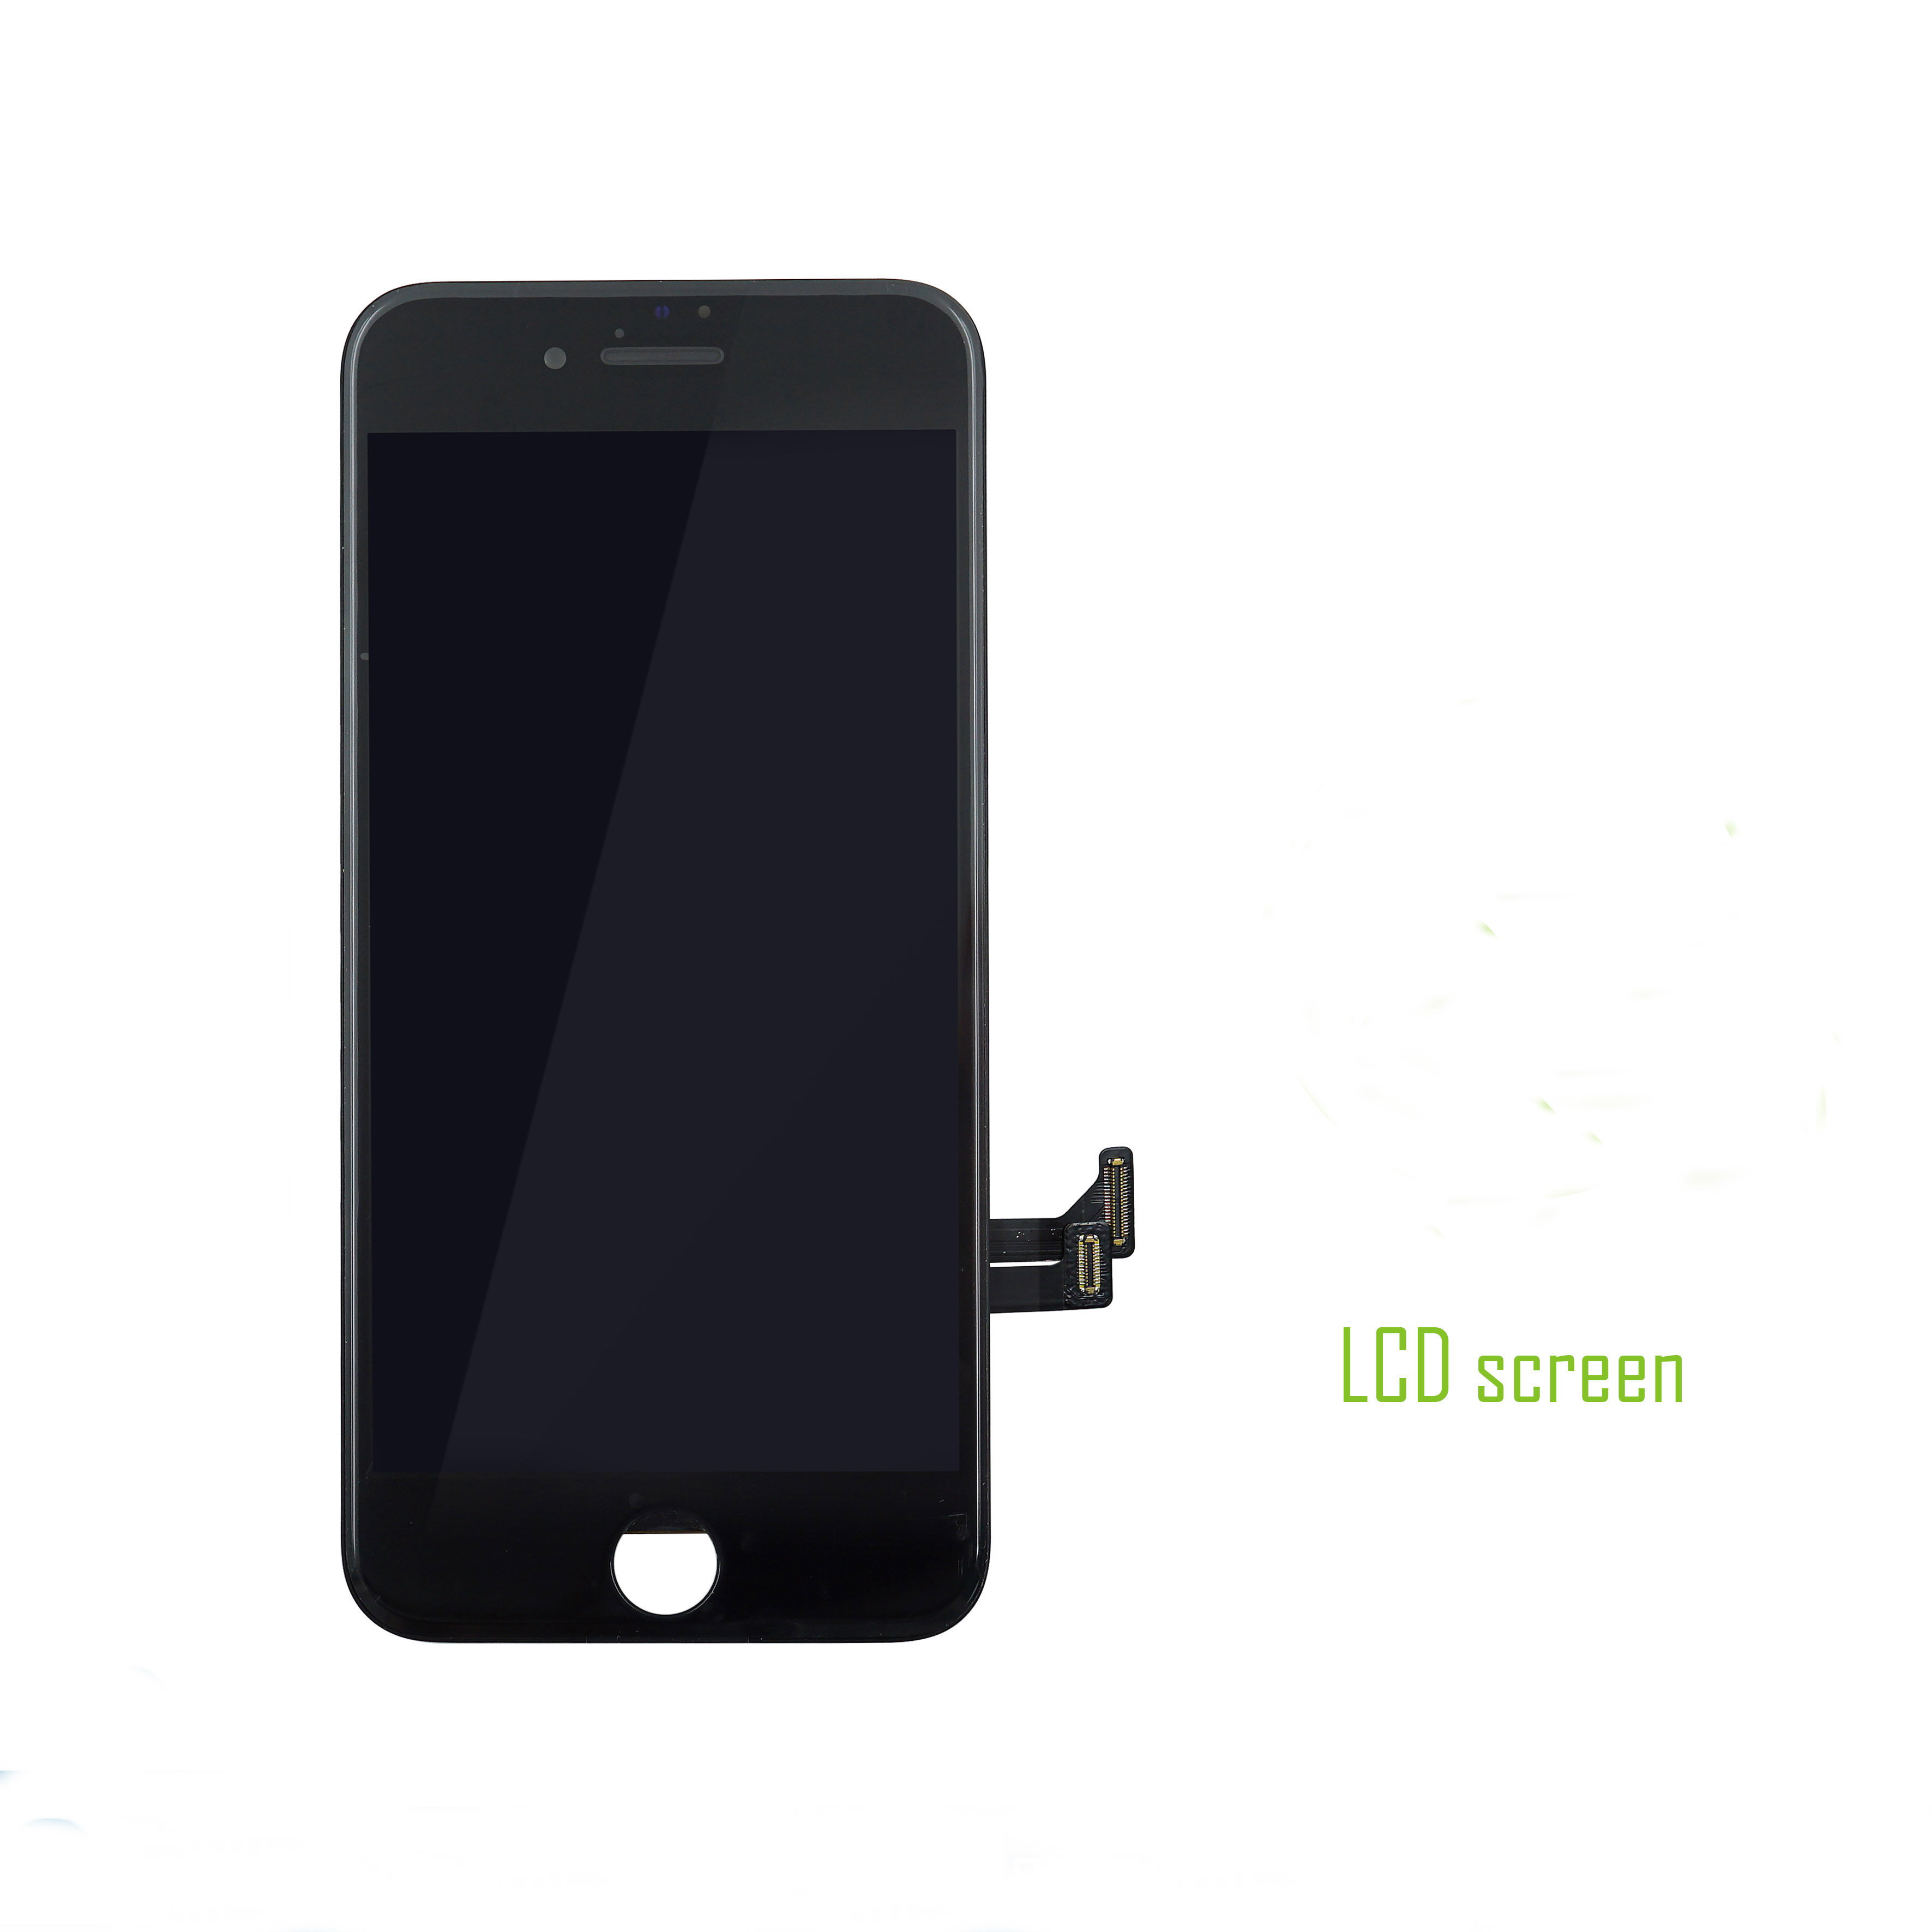 Mobilephone Display LCD for iPhone8 Iphoen7 iPhone6 iPhone5